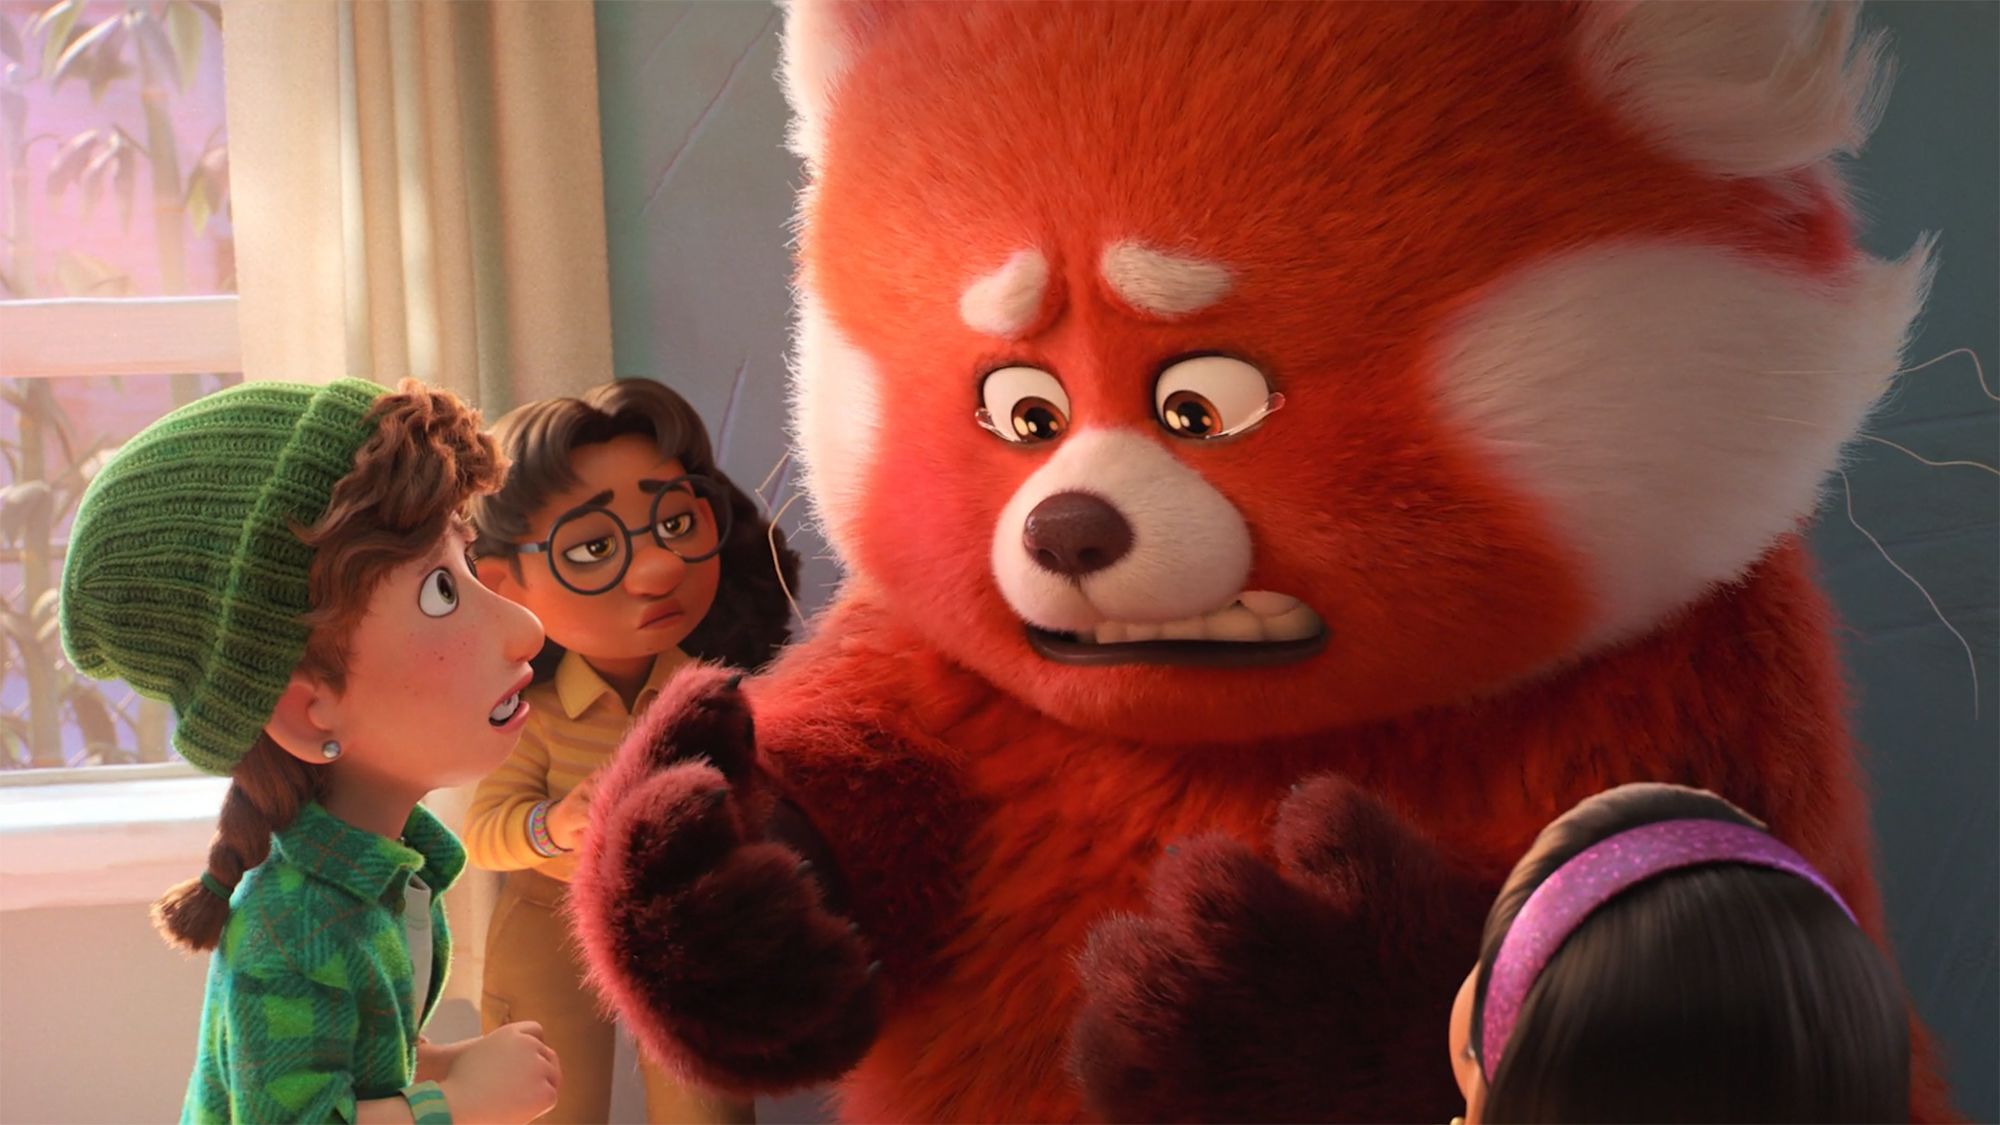 NEWS: A New 'Turning Red' Pixar Film Is Coming To Theaters in 2022!